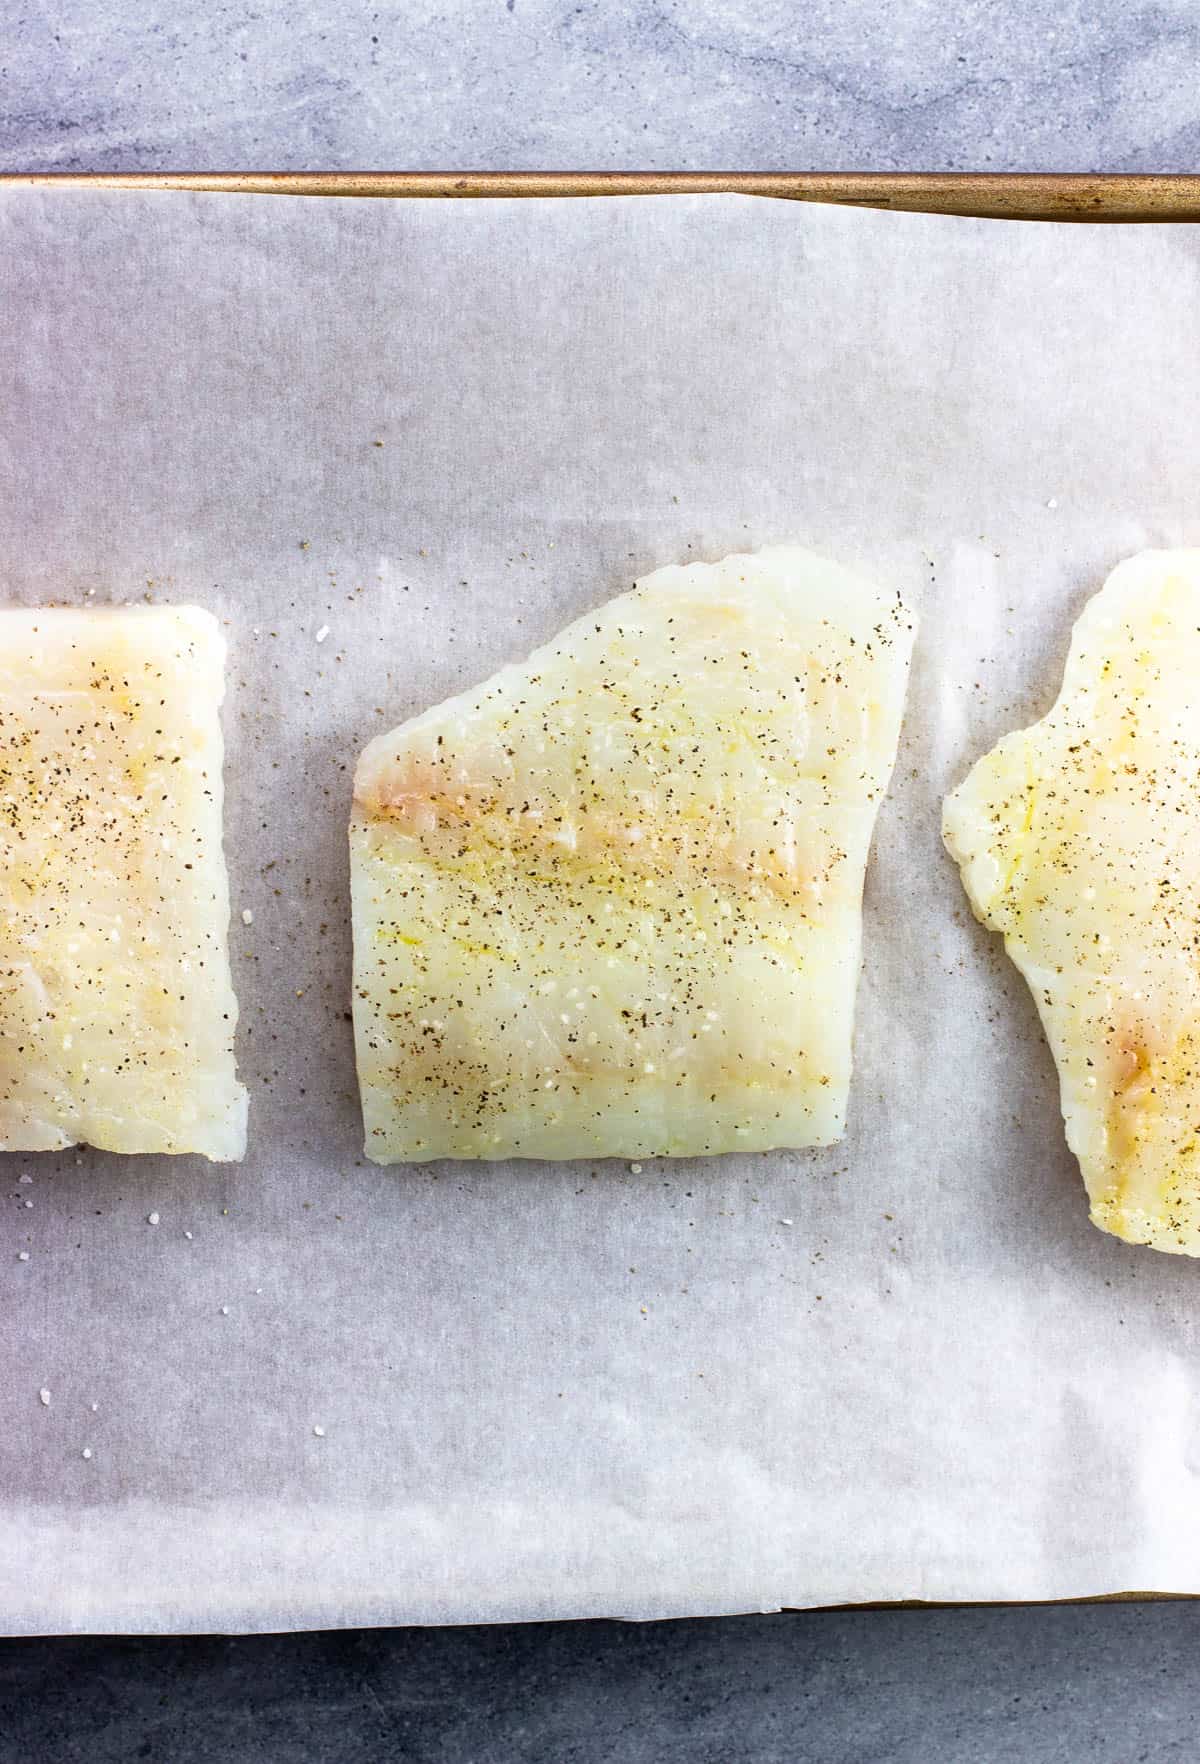 Raw cod fillets brushed with olive oil and seasoned with salt and pepper.